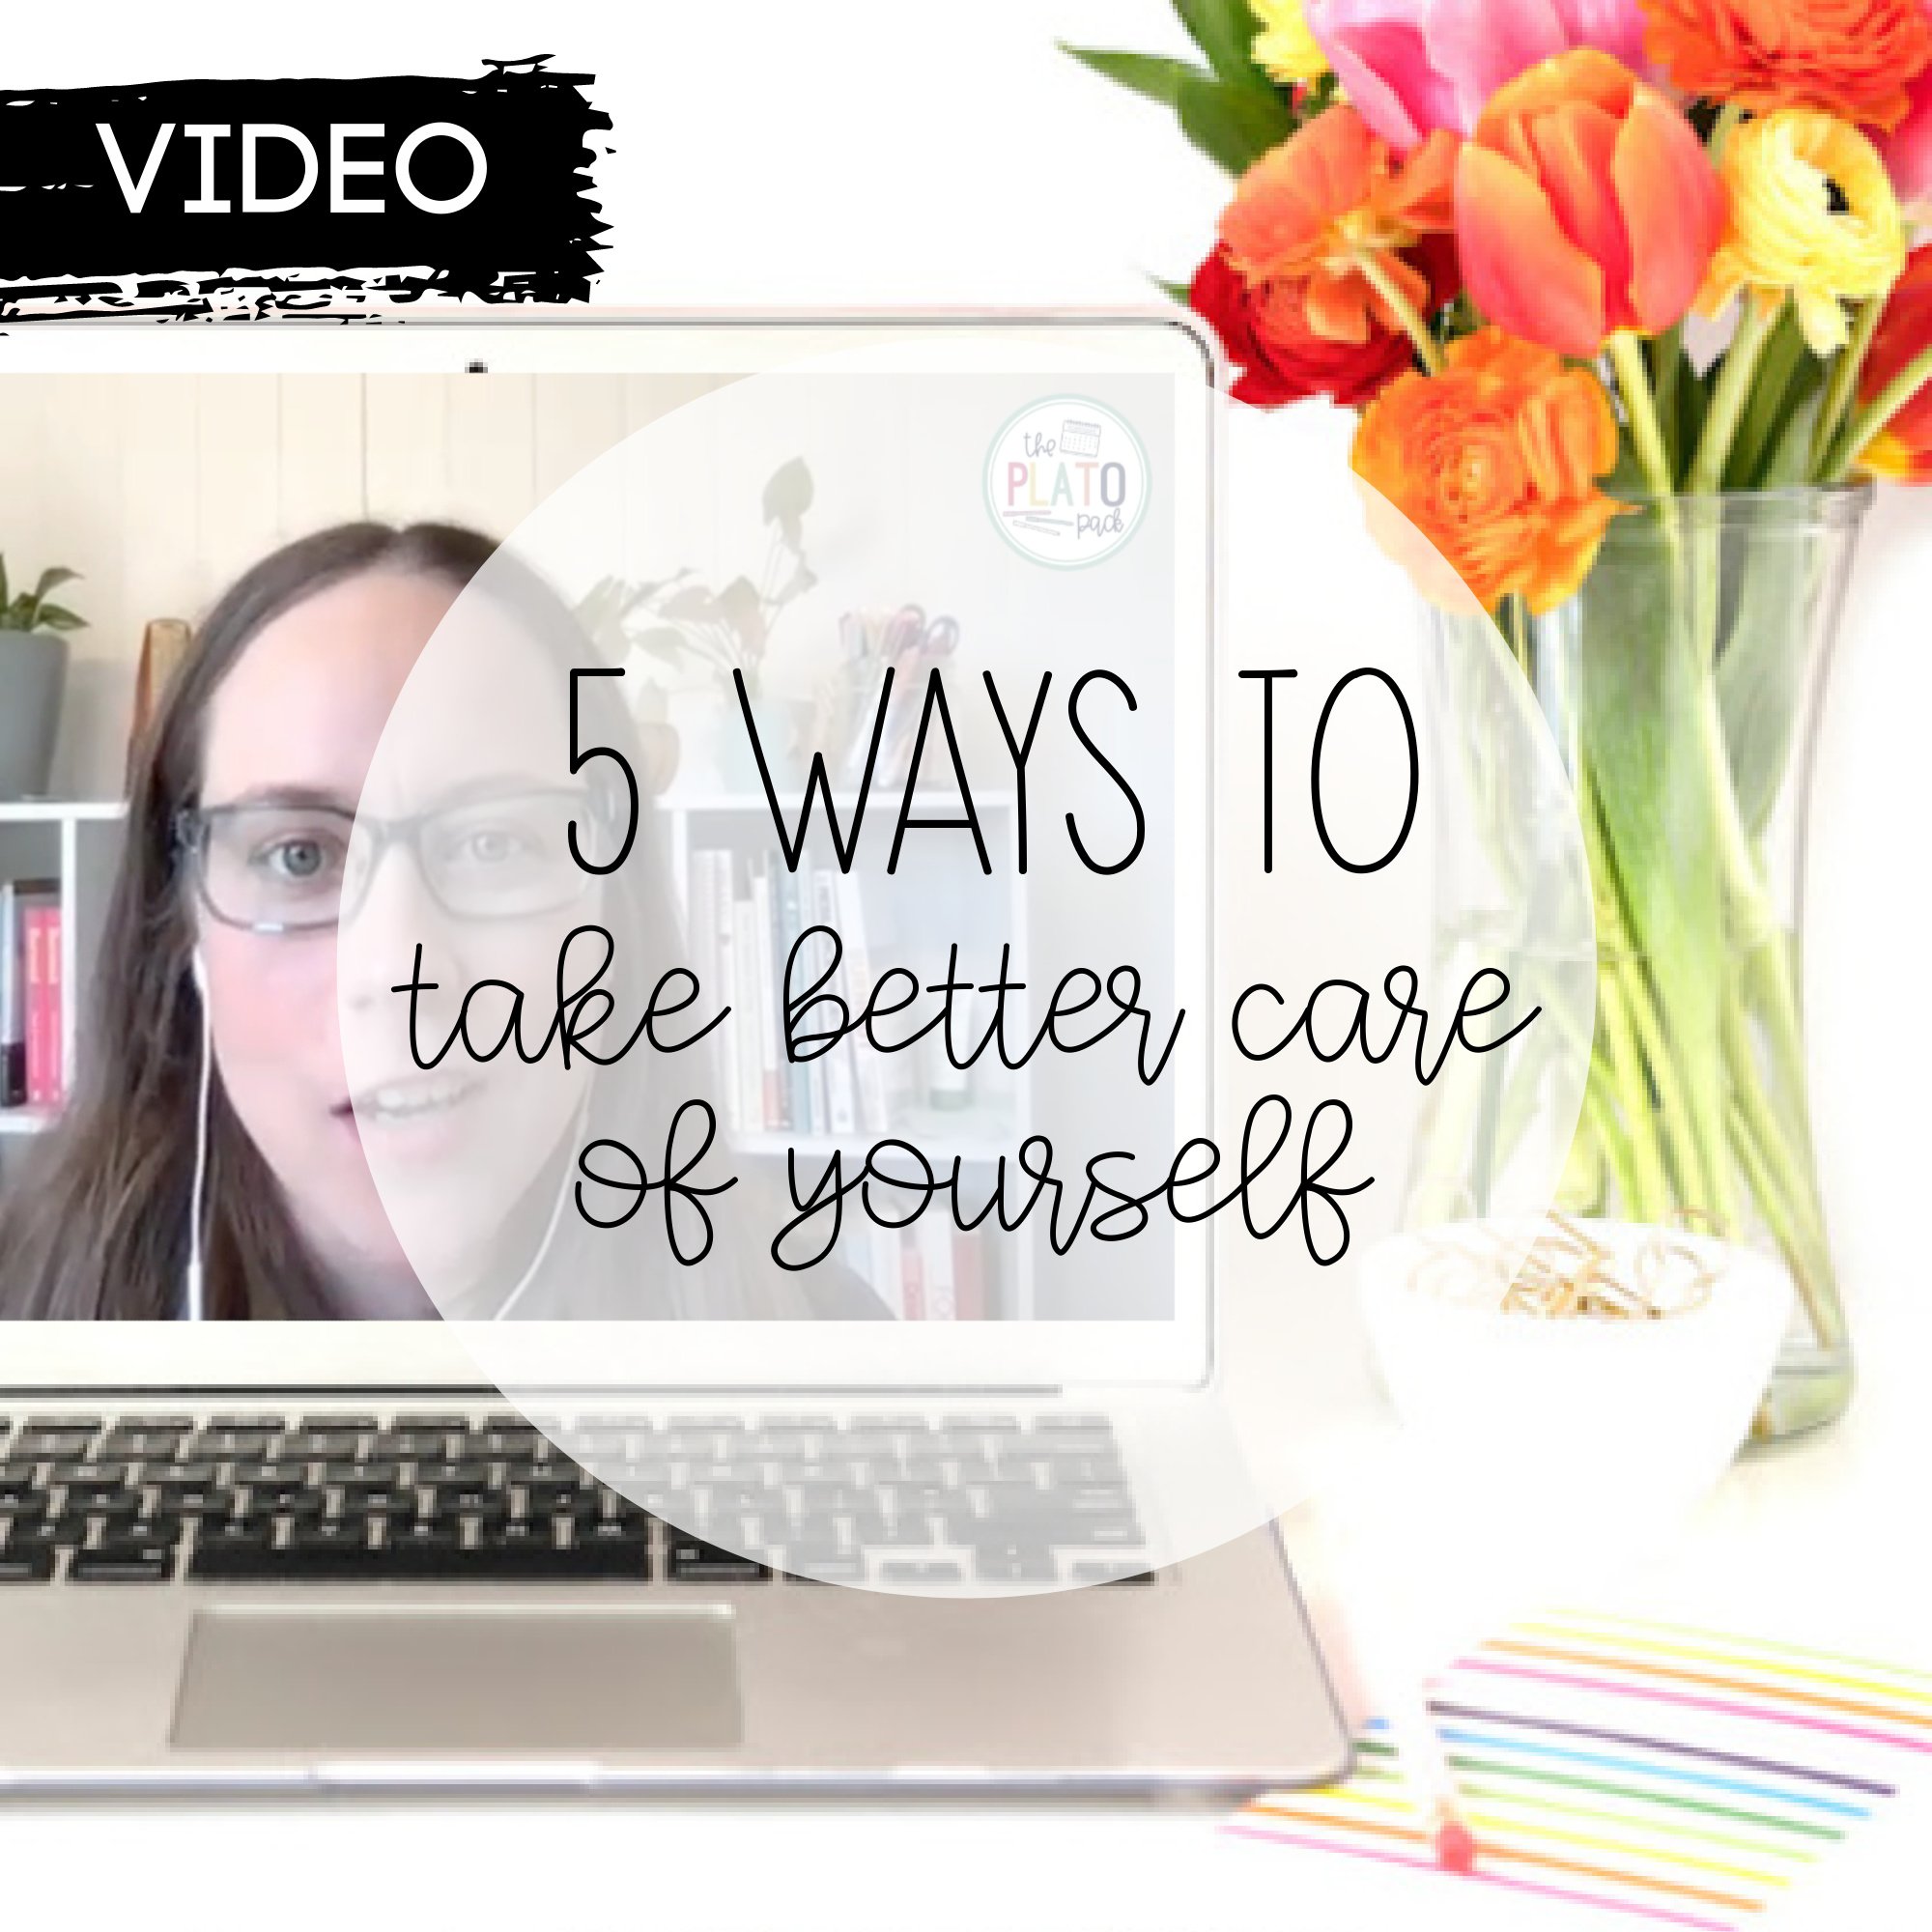 5 Simple Ways to Take Better Care of Yourself